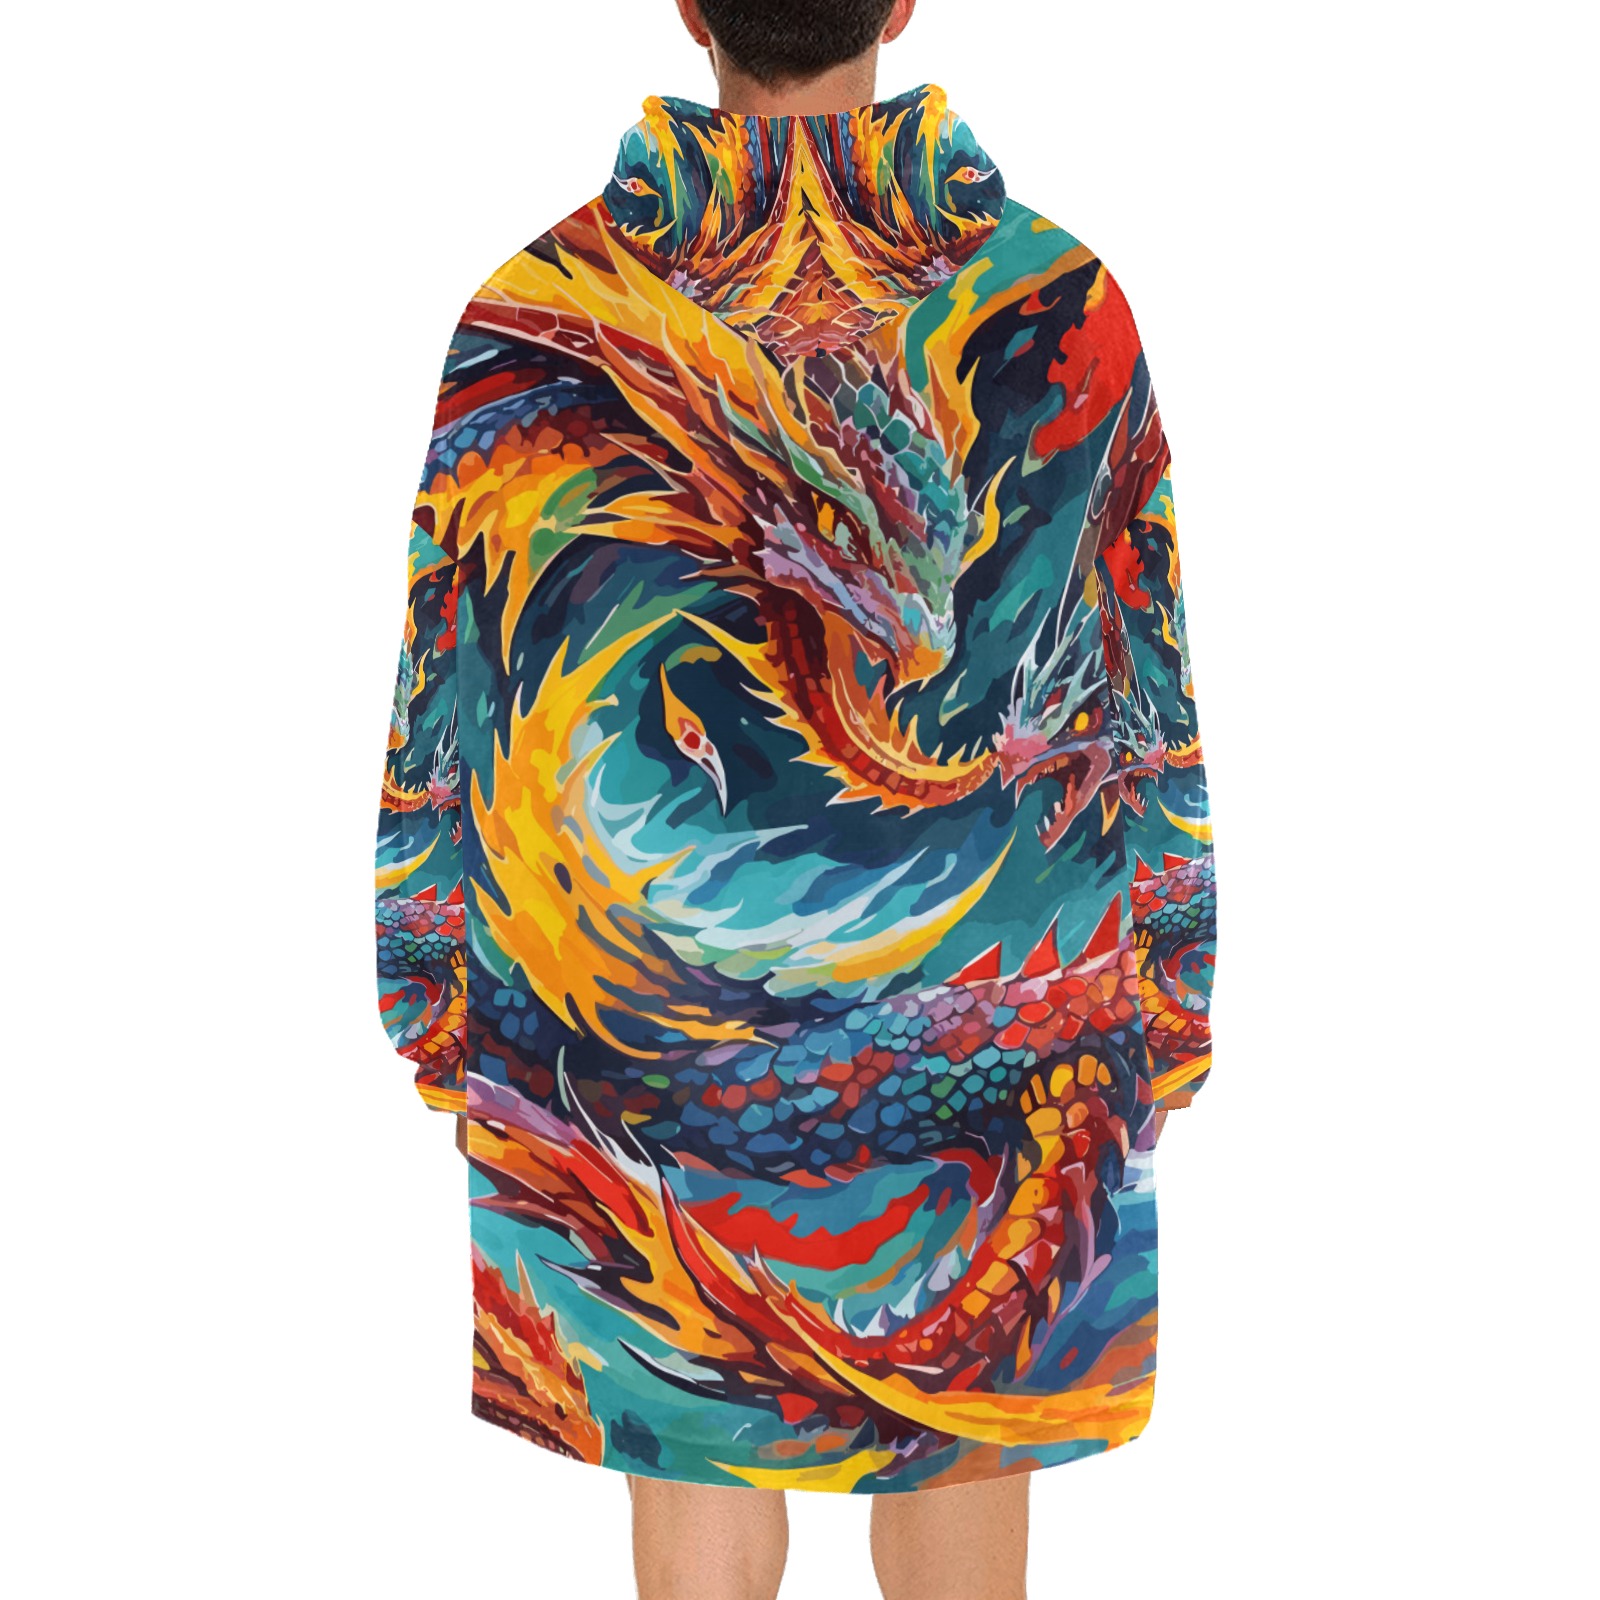 Fantasy fire dragons, flames and smoke art. Blanket Hoodie for Men